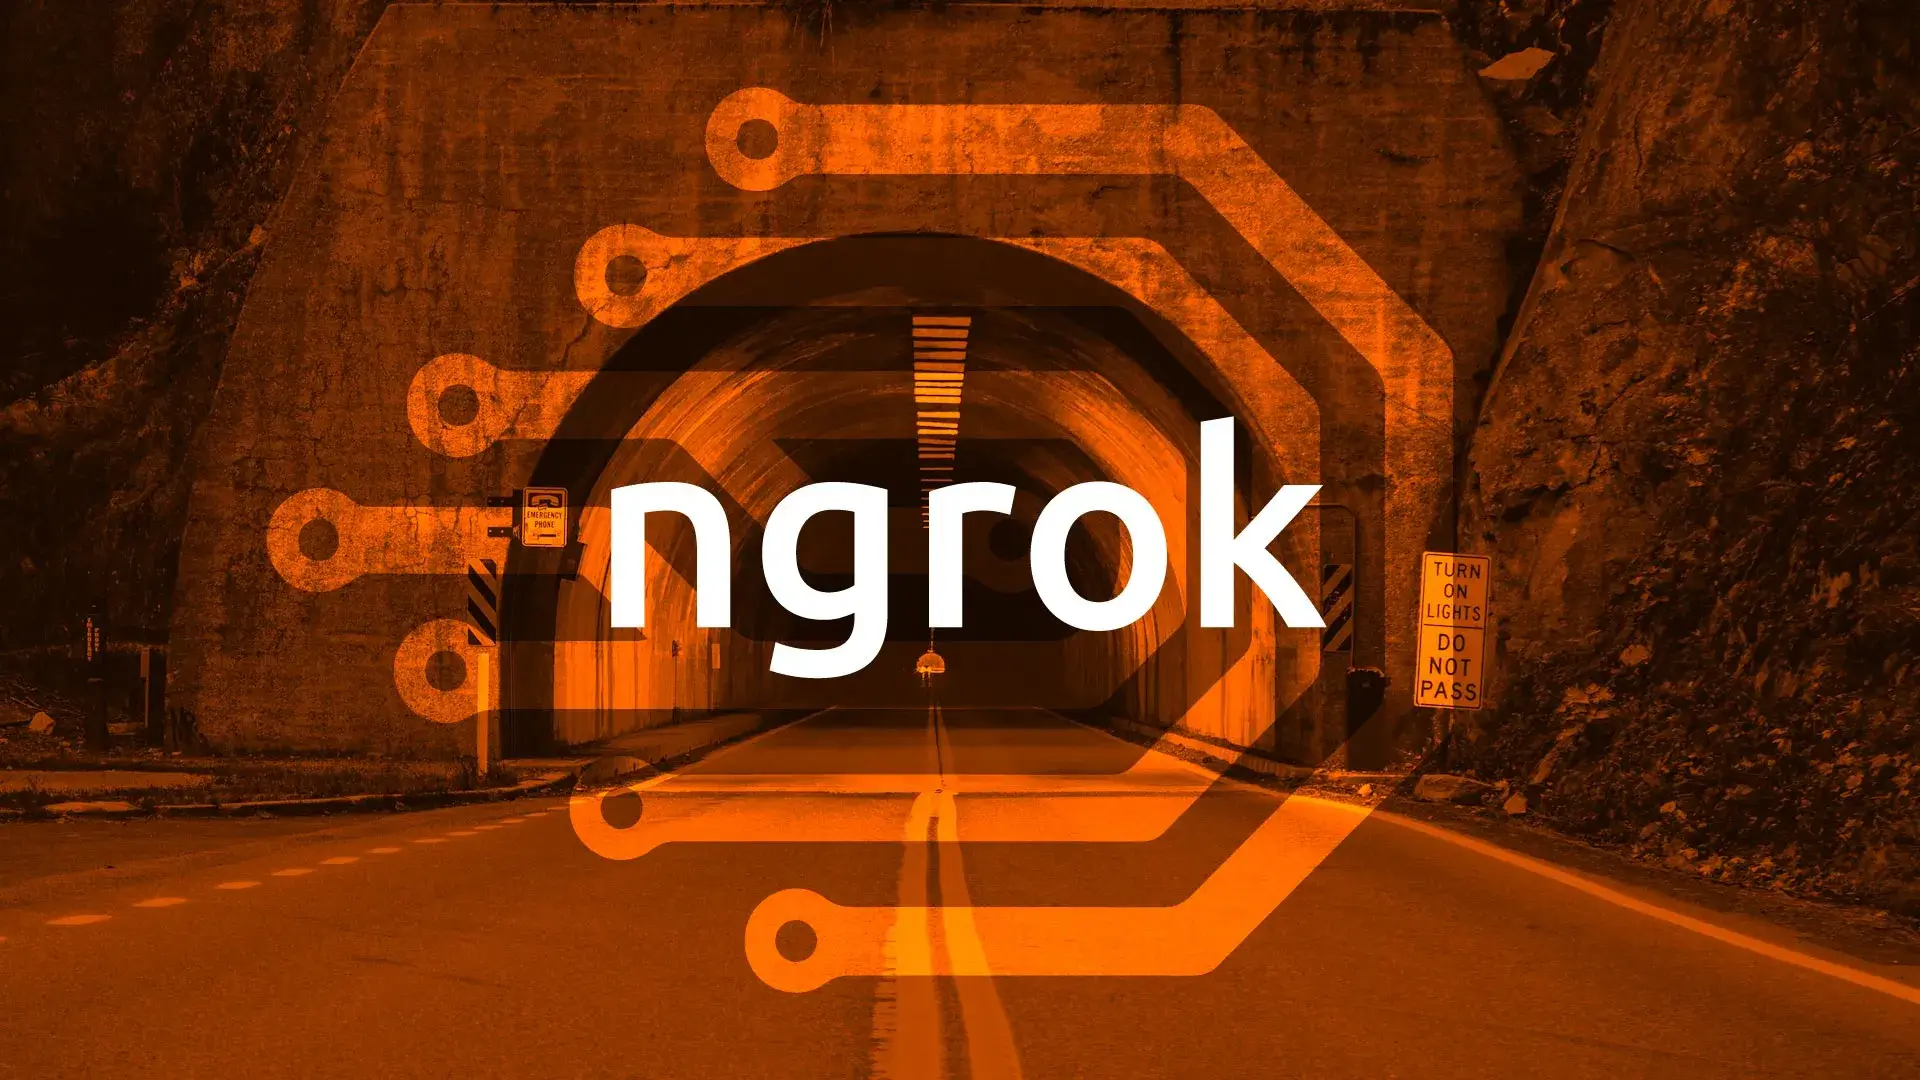 LOCAL TUNNELING CON NGROK